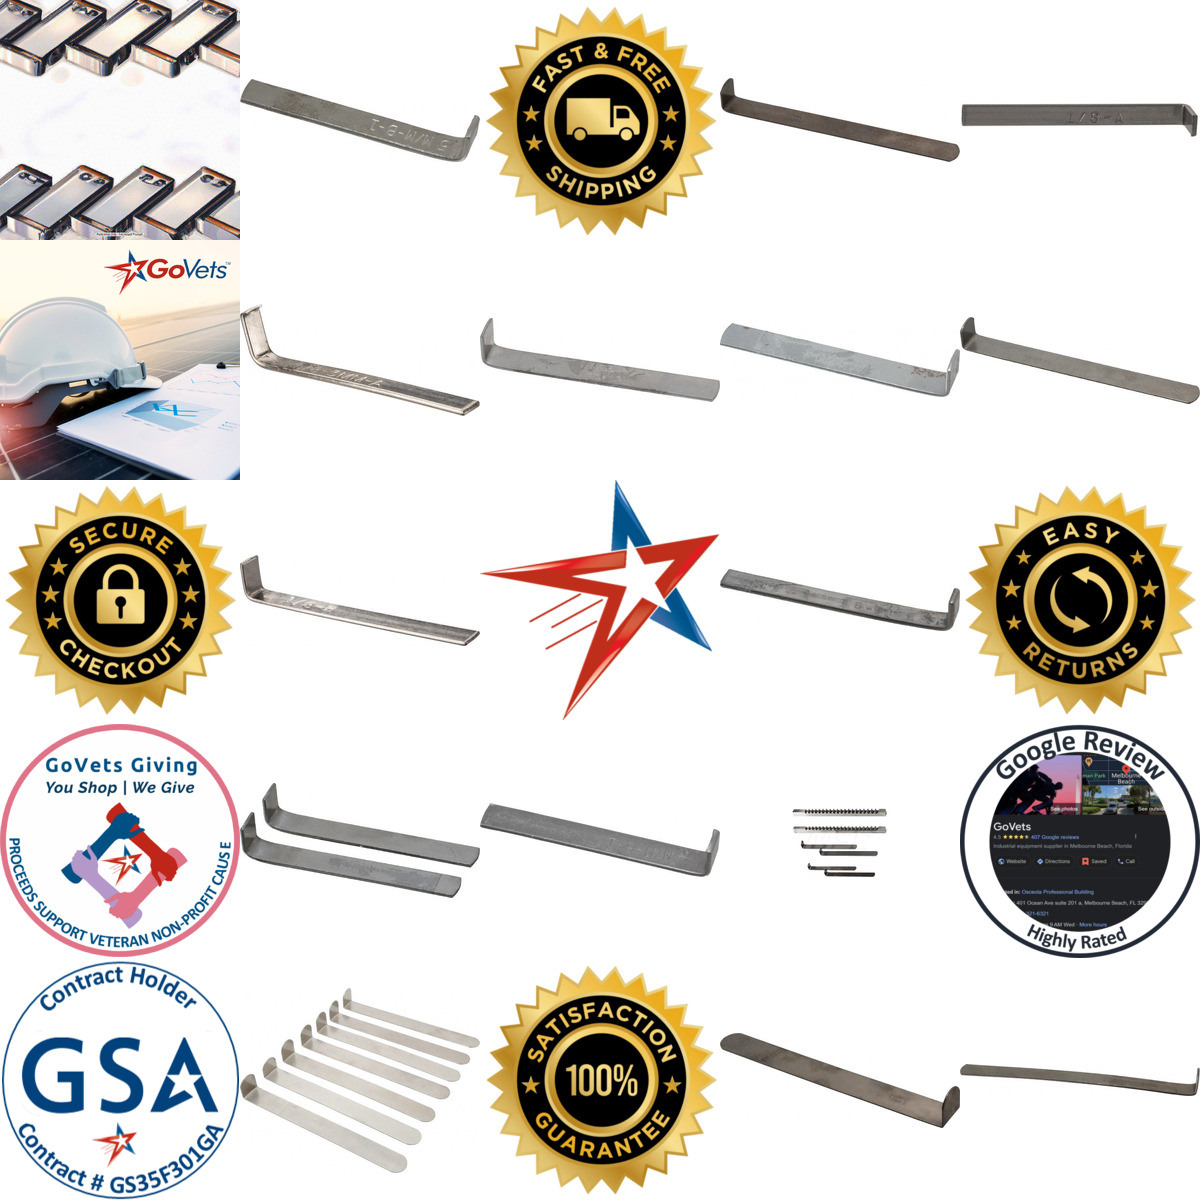 A selection of Broach Shims products on GoVets